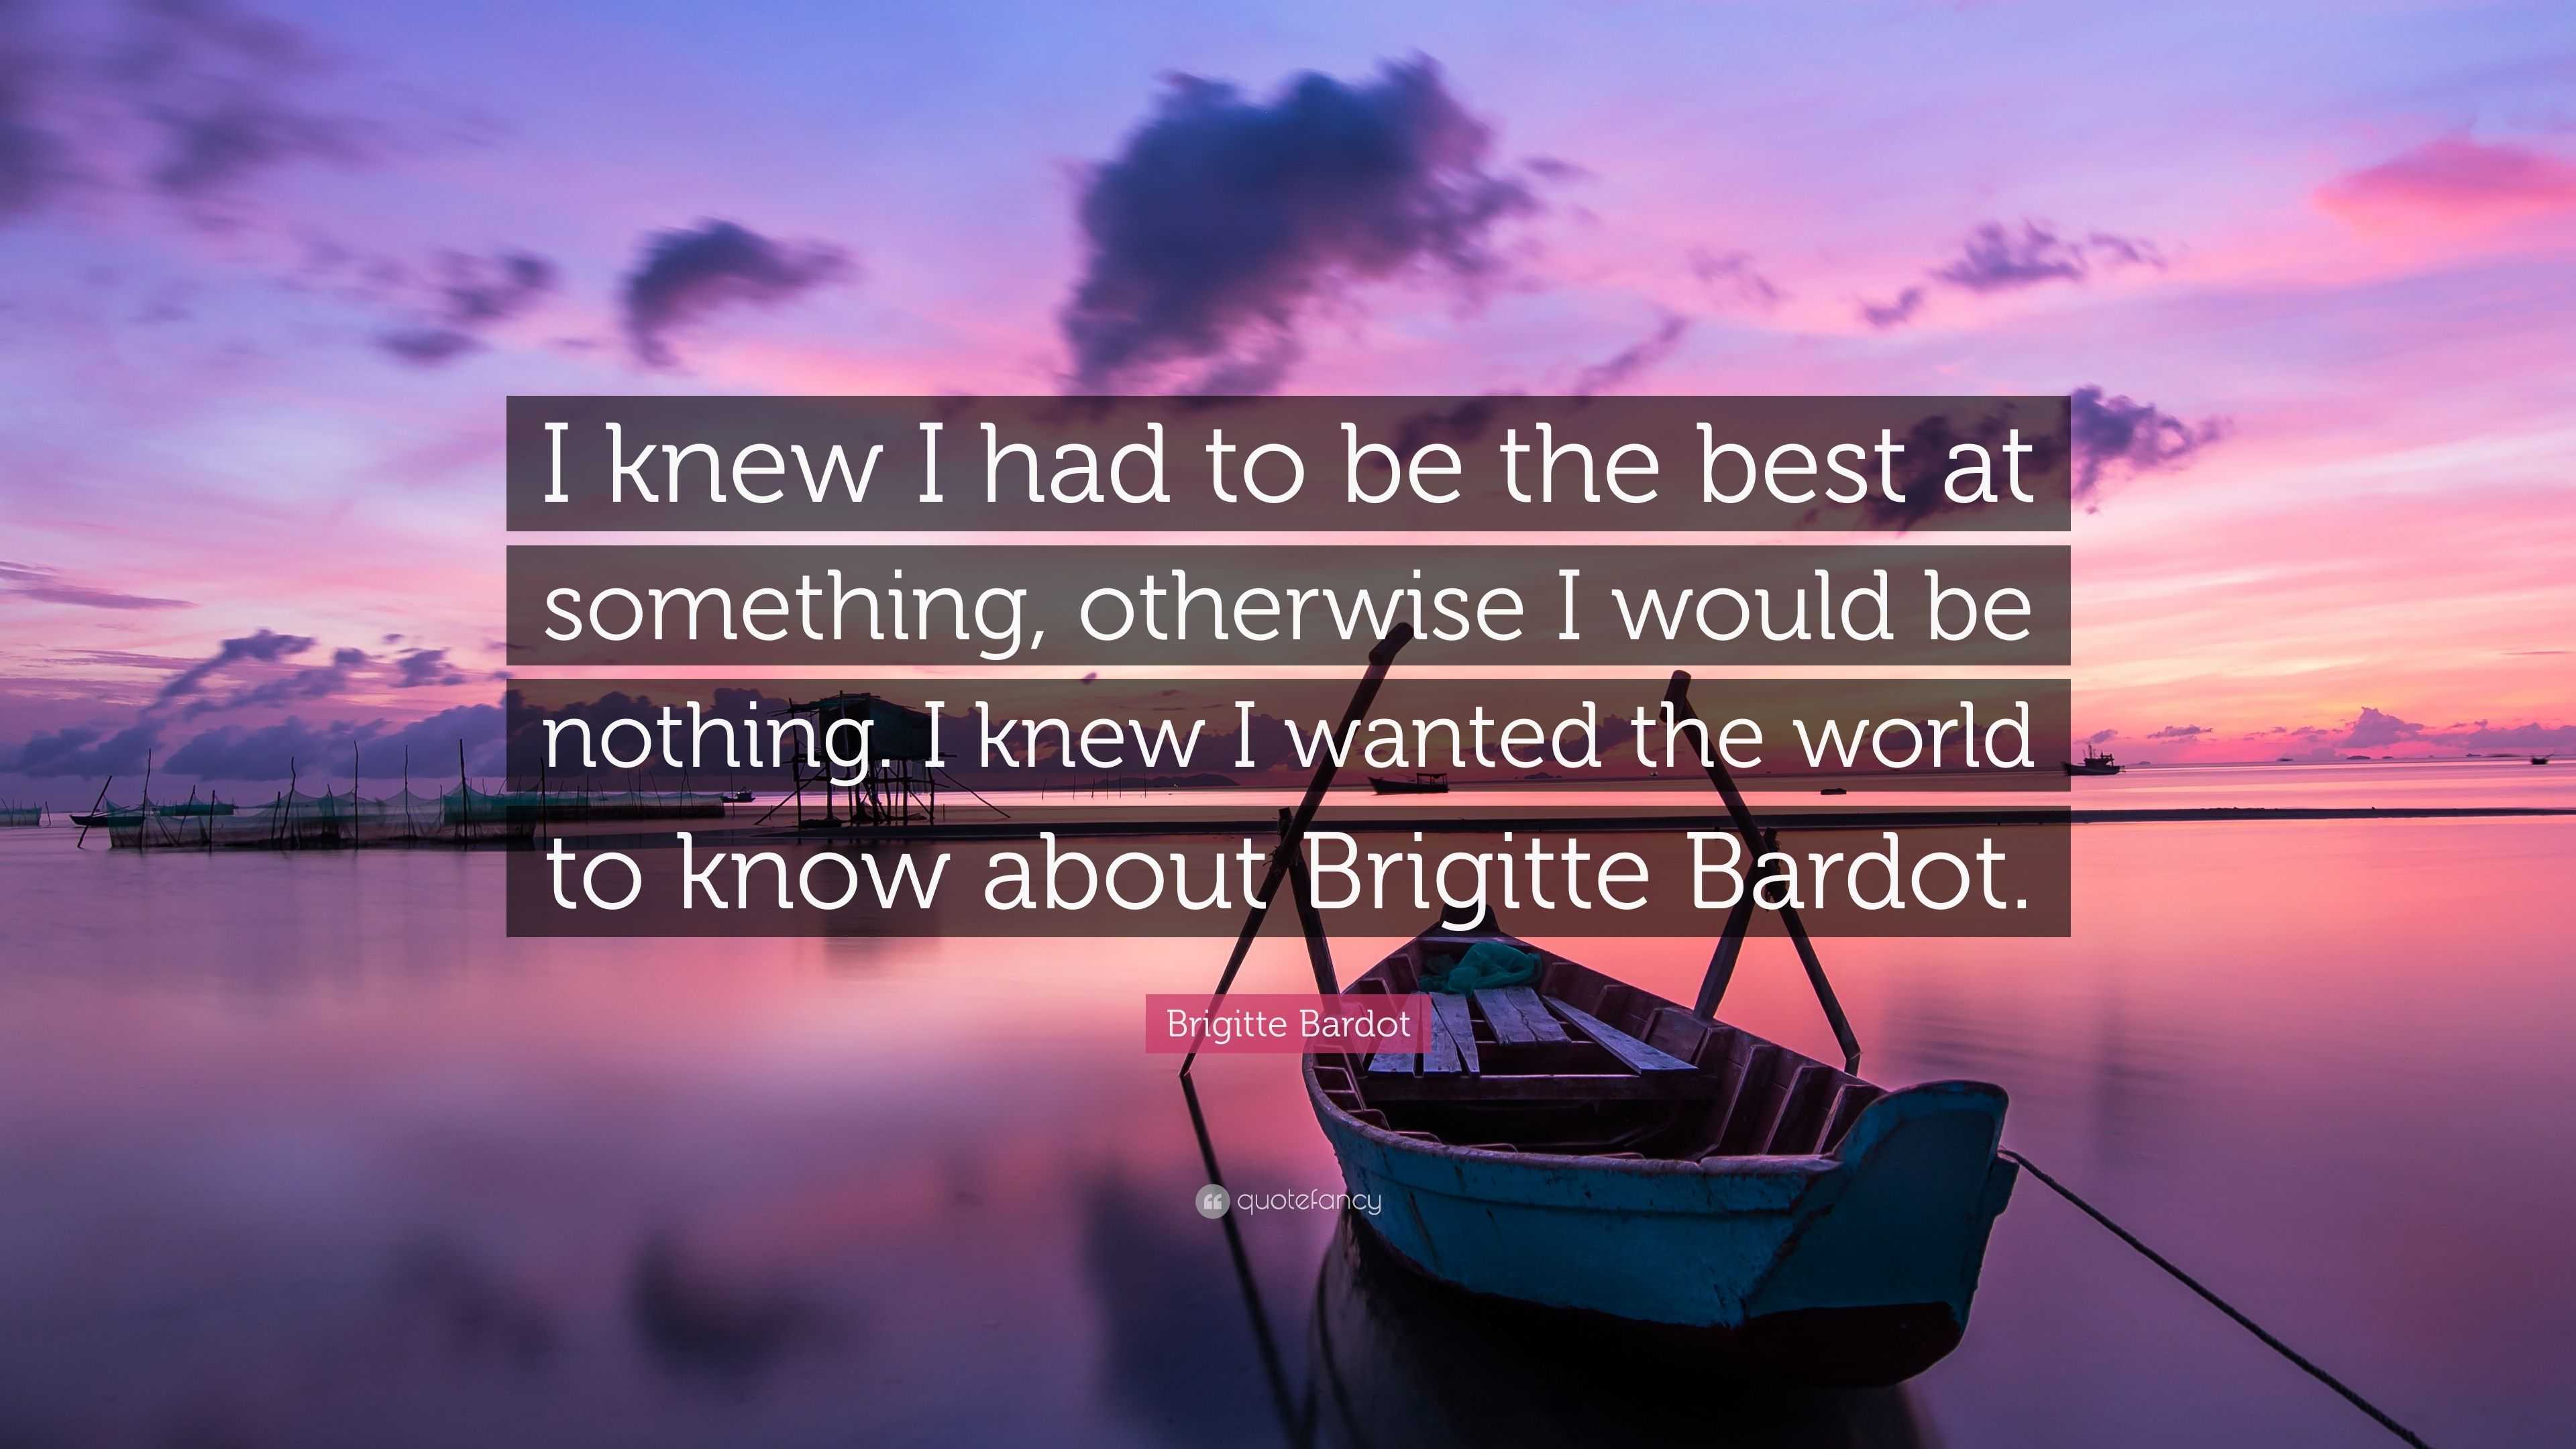 Brigitte Bardot Quote I Knew I Had To Be The Best At Something Images, Photos, Reviews